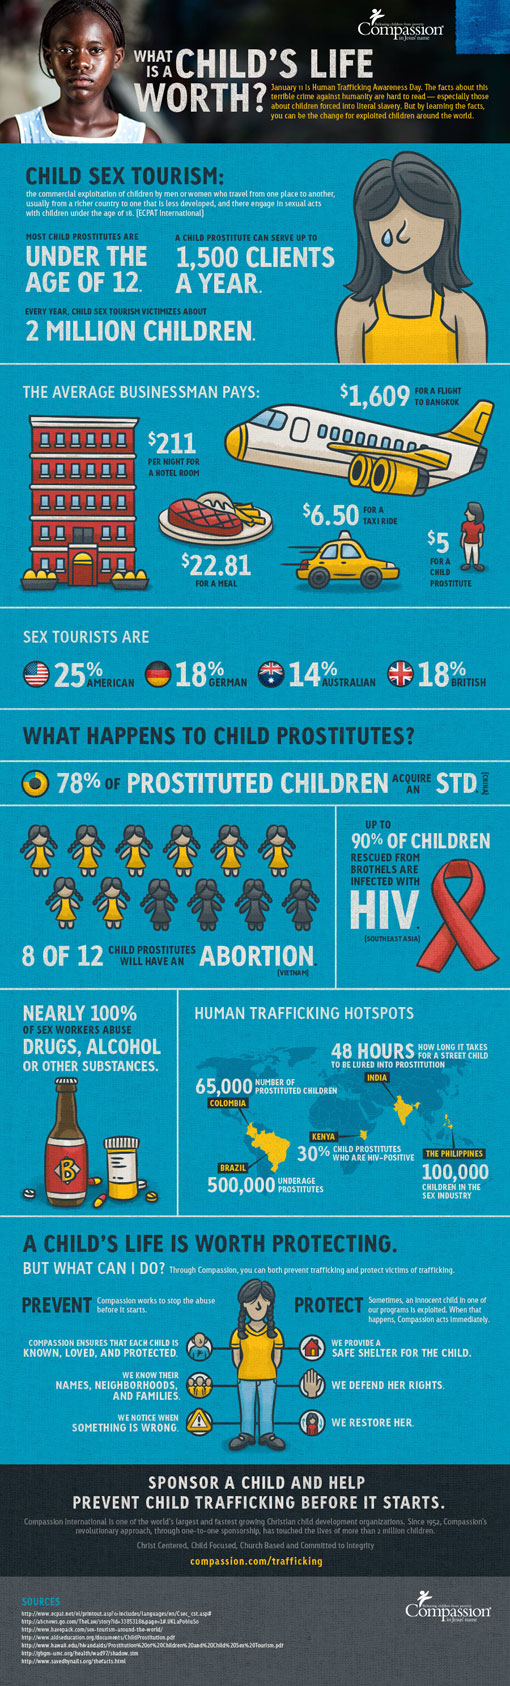 human-trafficking-infographic-small